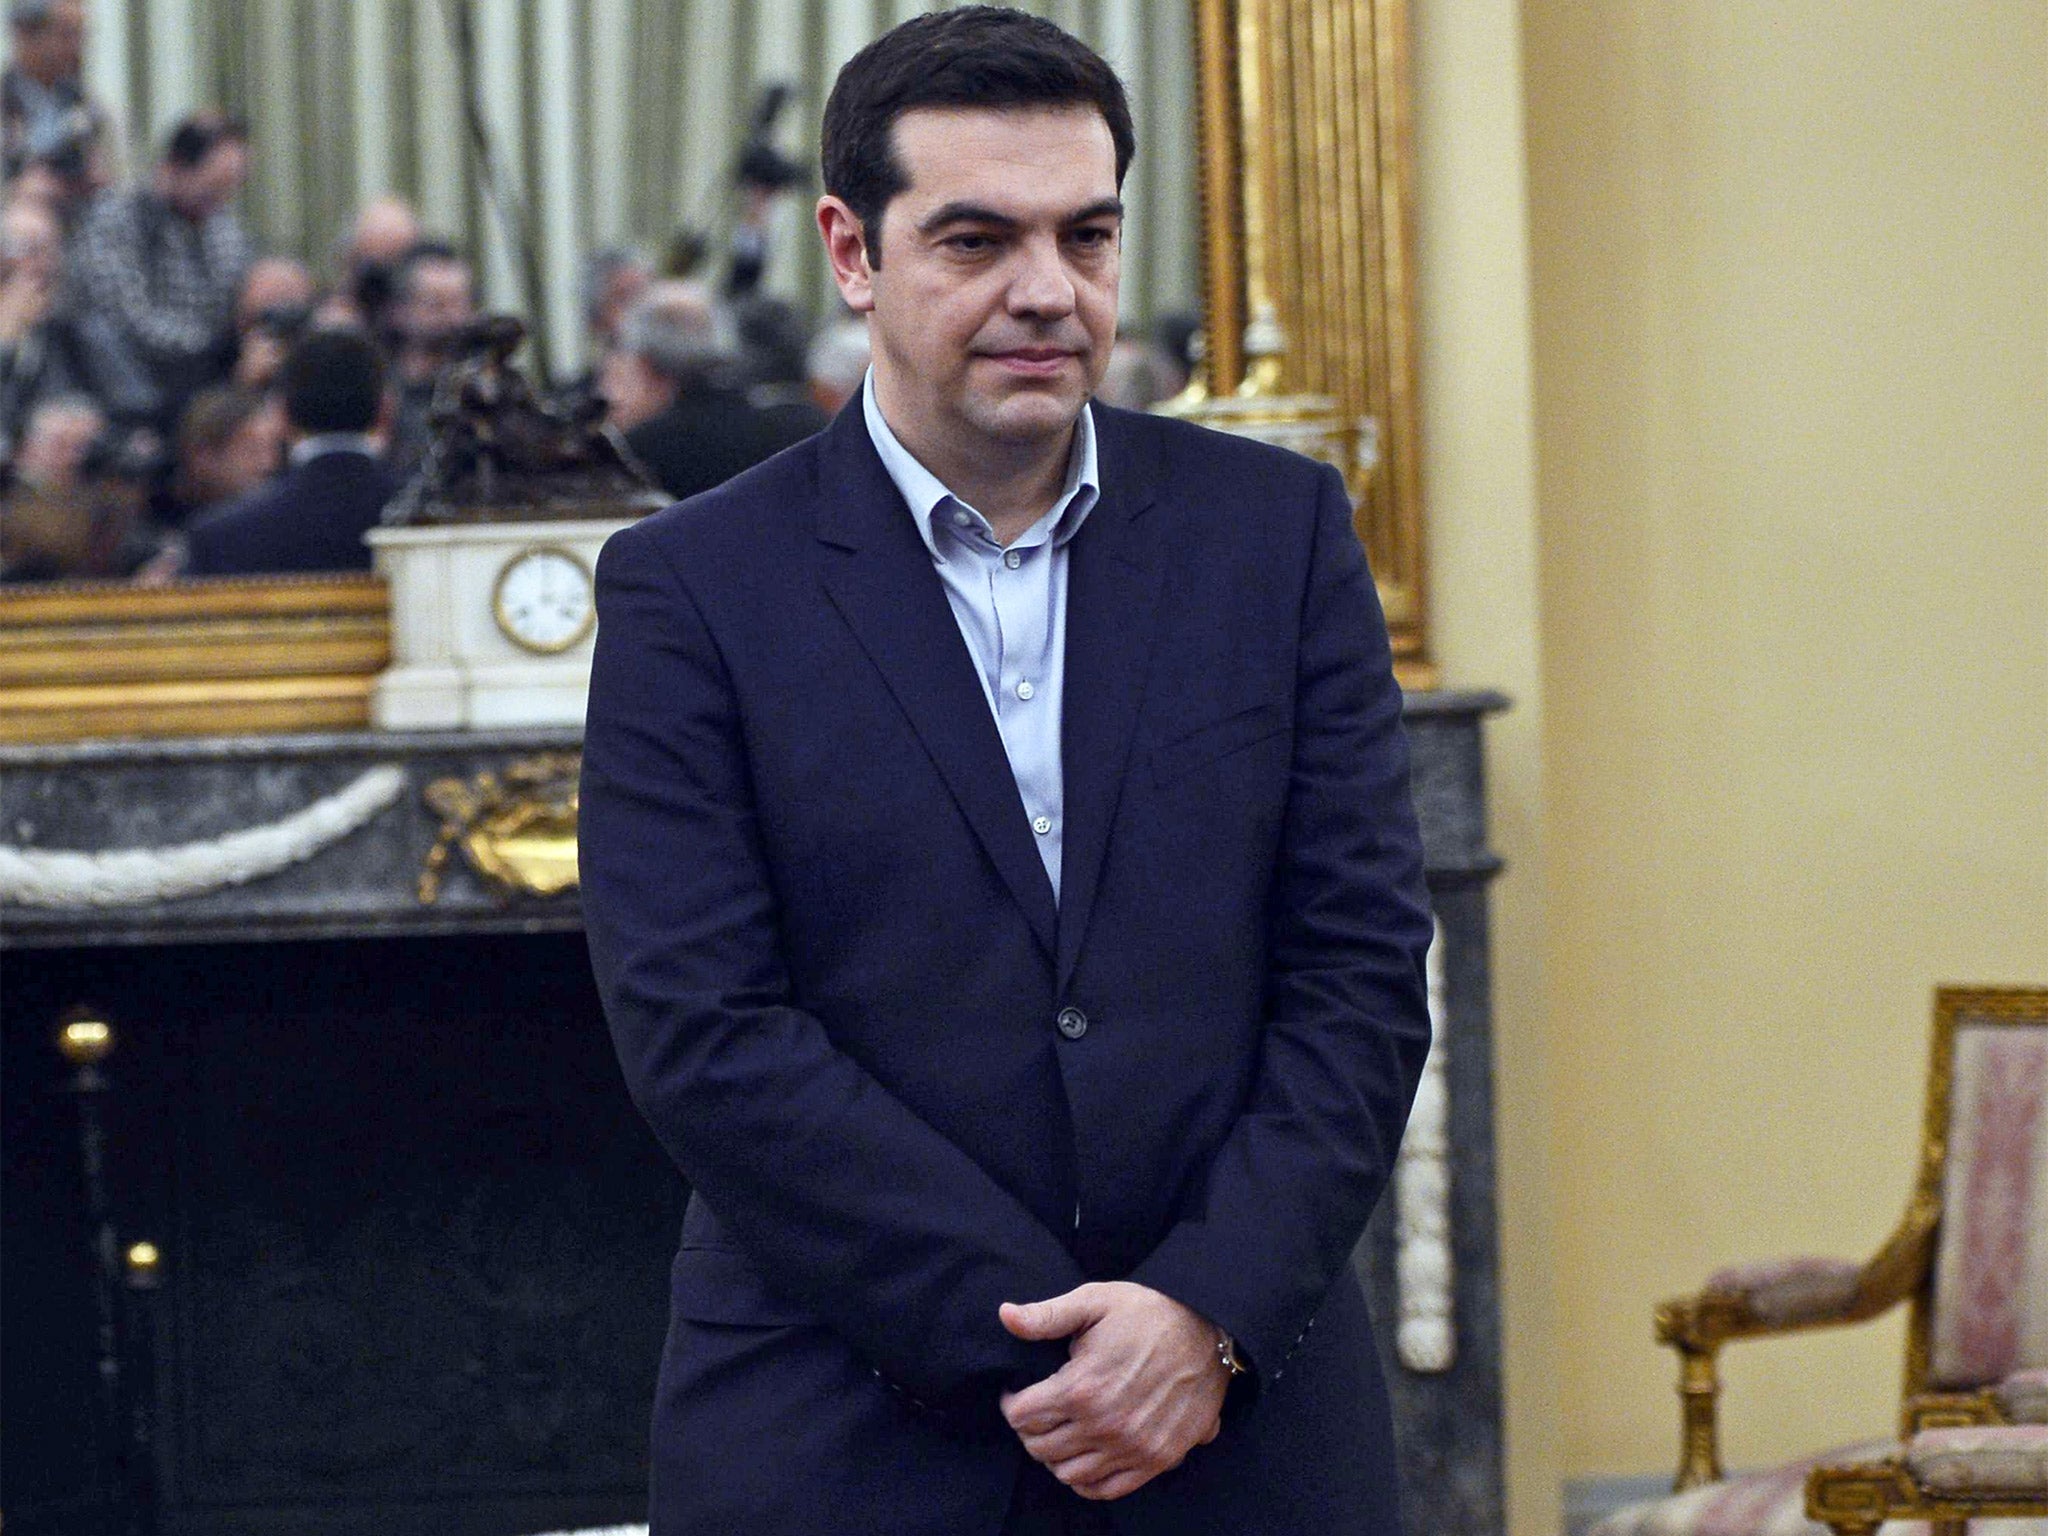 Newly elected Greek Prime Minister Alexis Tsipras was sworn in during a ceremony at the Presidental Palace in Athens on Tuesday